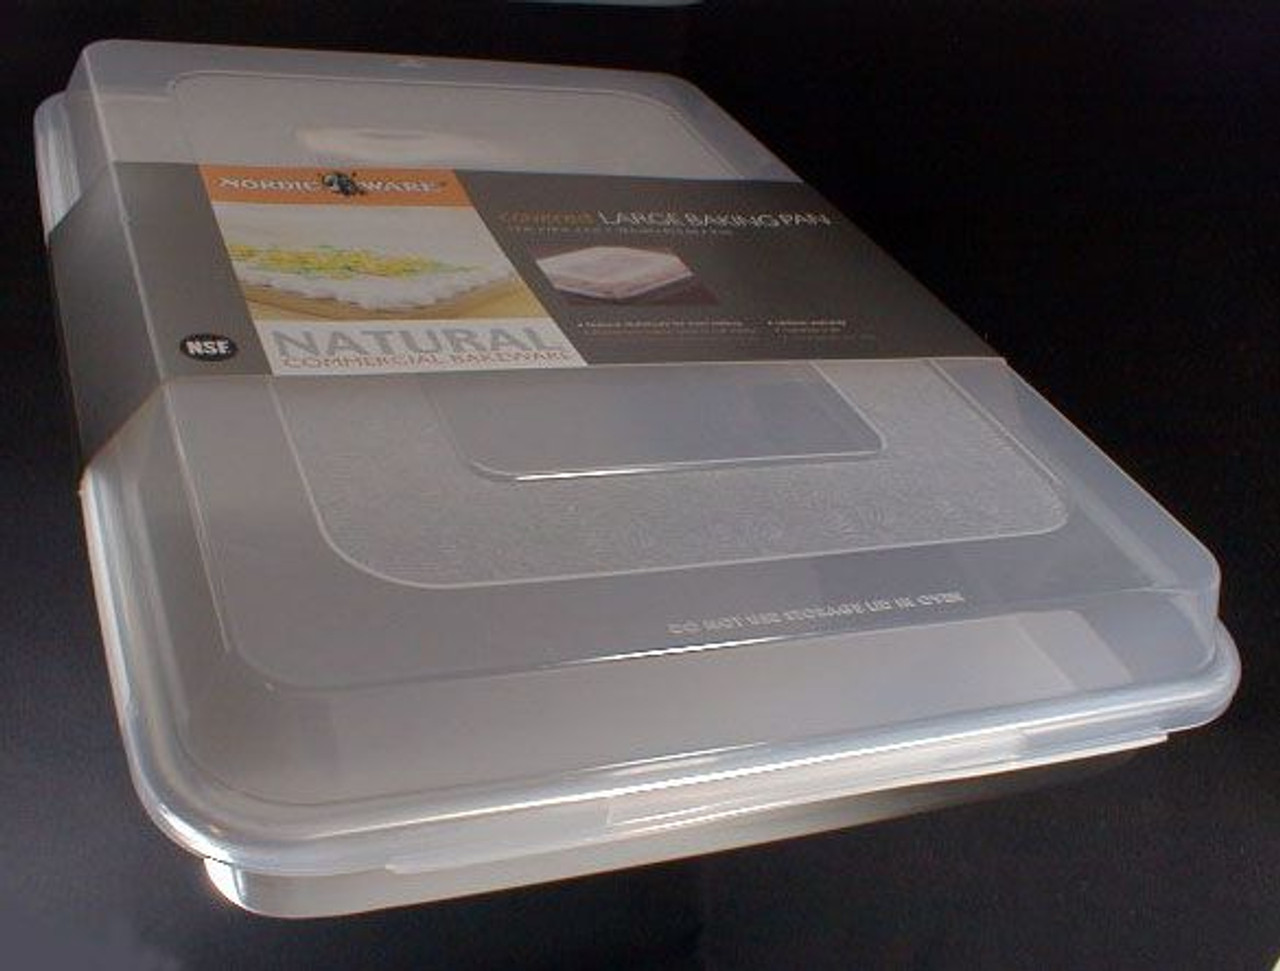 Nordic Ware Half Sheet Cover, 13 by 18 Inch, Clear